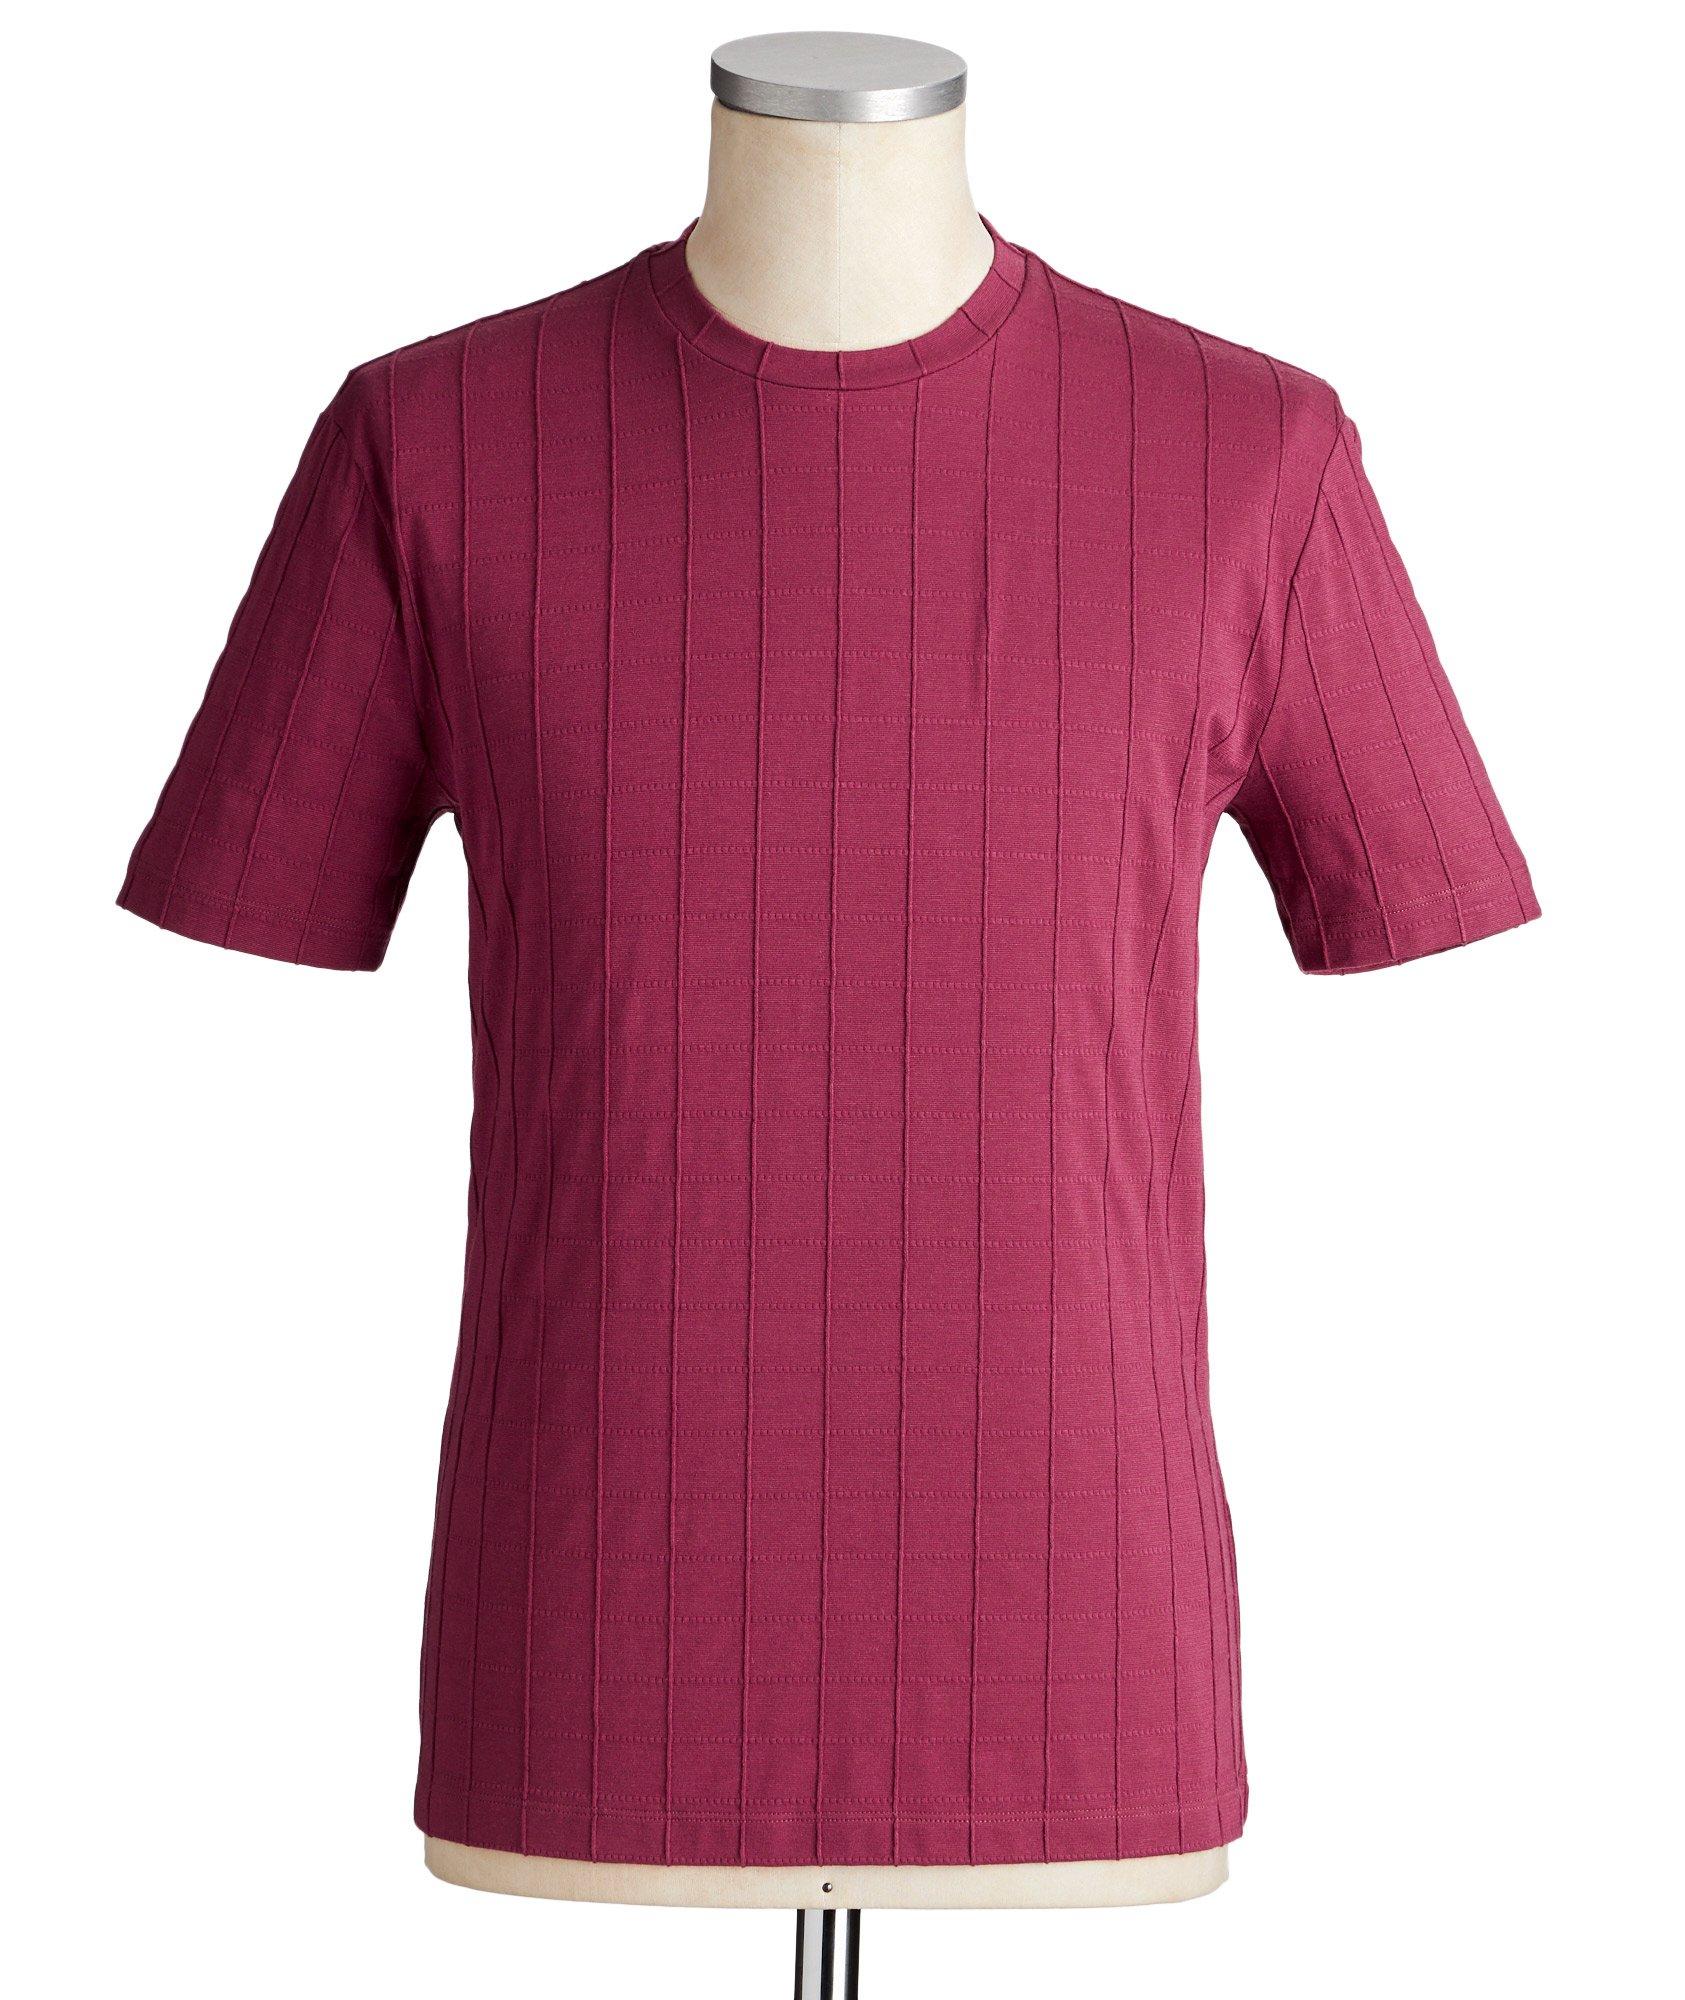 Textured Stretch-Cashmere T-Shirt image 0